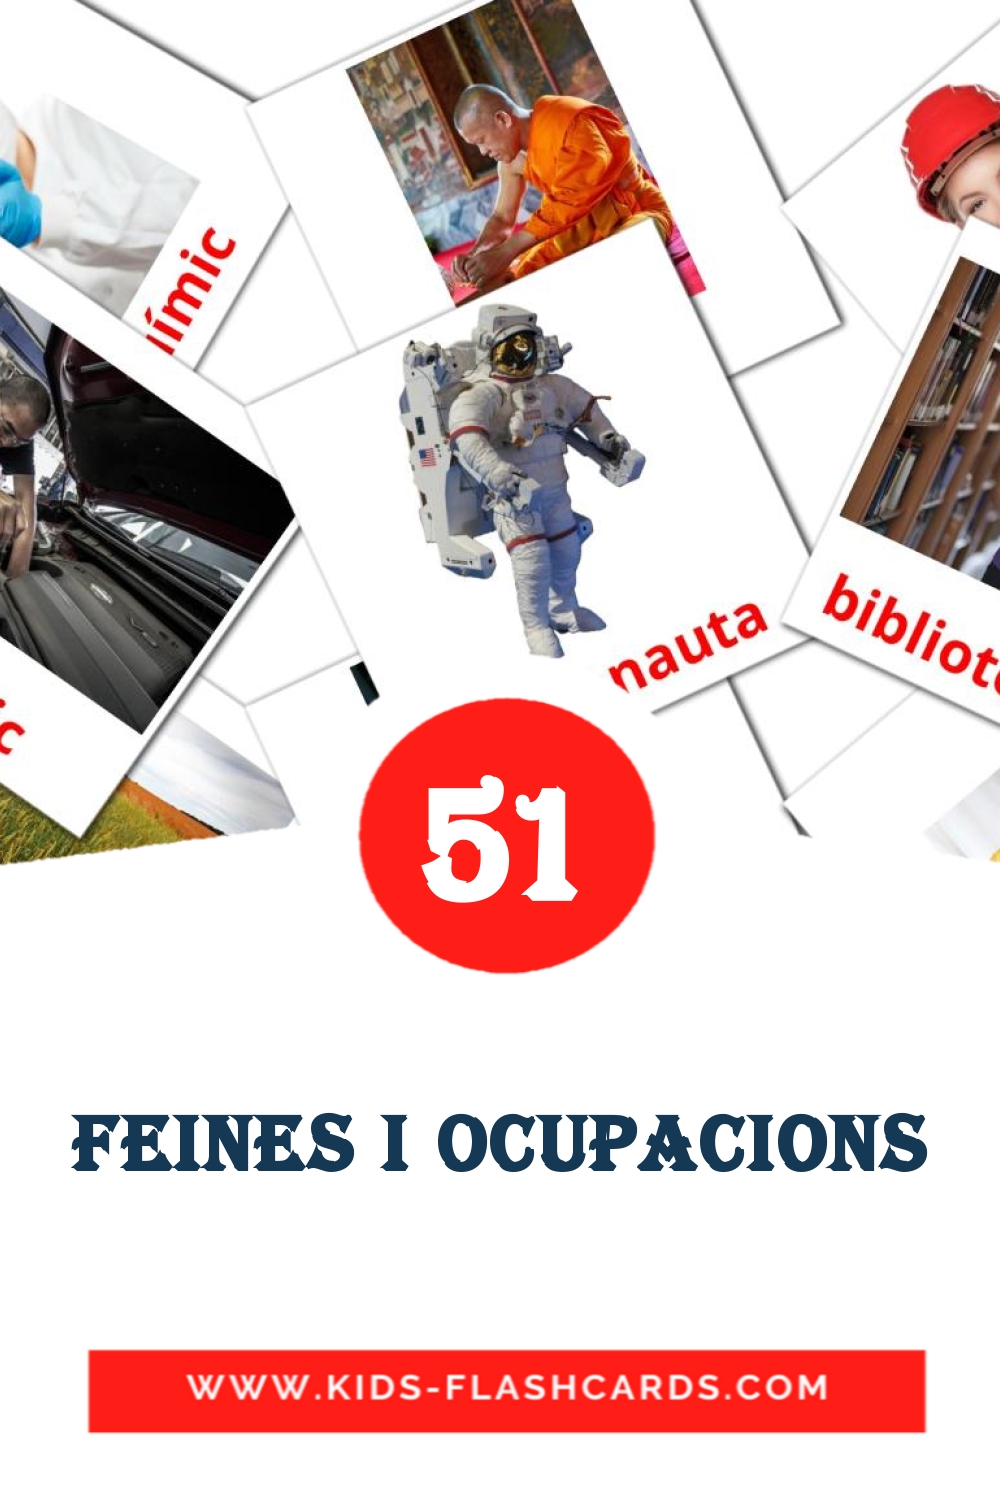 51 Feines i Ocupacions Picture Cards for Kindergarden in catalan